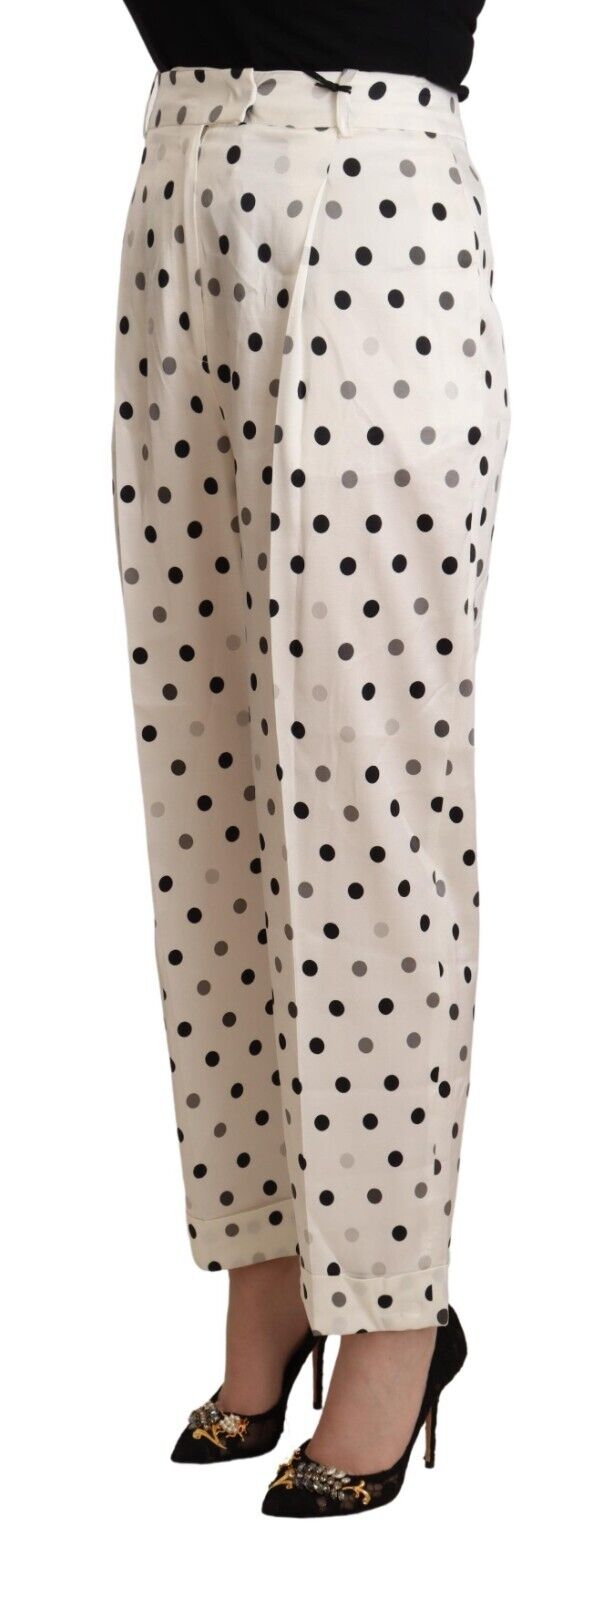 Ermanno Scervino White Polka Dotted High Waist Tapered Pants